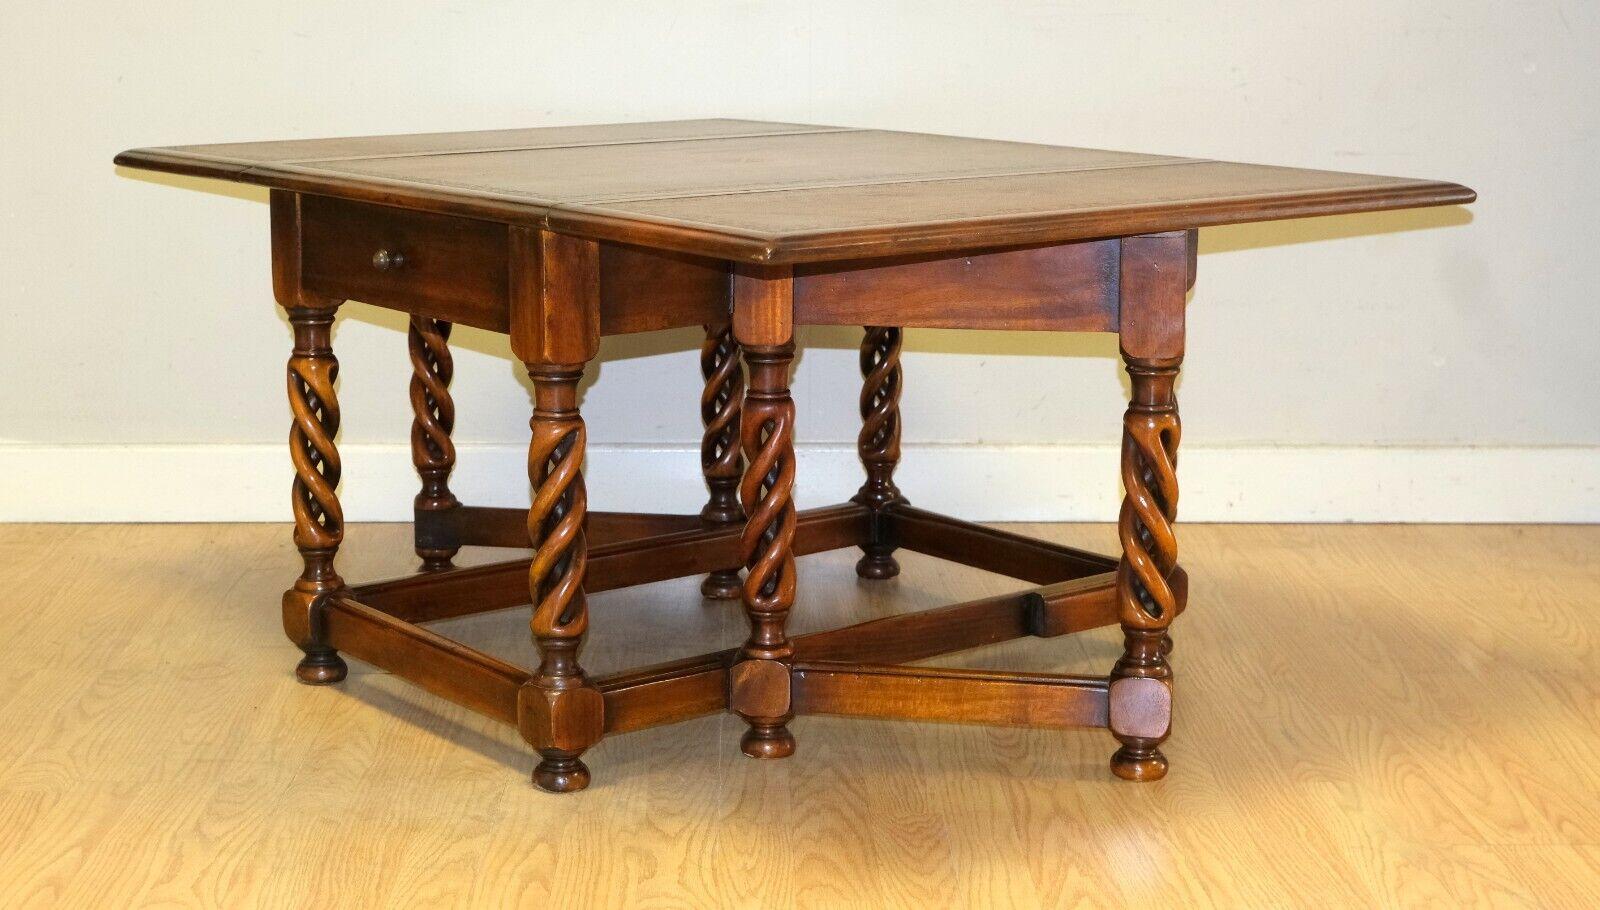 We are delighted to offer for sale this elegant mahogany Theodore Alexander drop leaf brown leather top gate legs coffee table. 

The beautiful twist and the soft combination with the rest of the legs are truly one of a kind. They are simply well